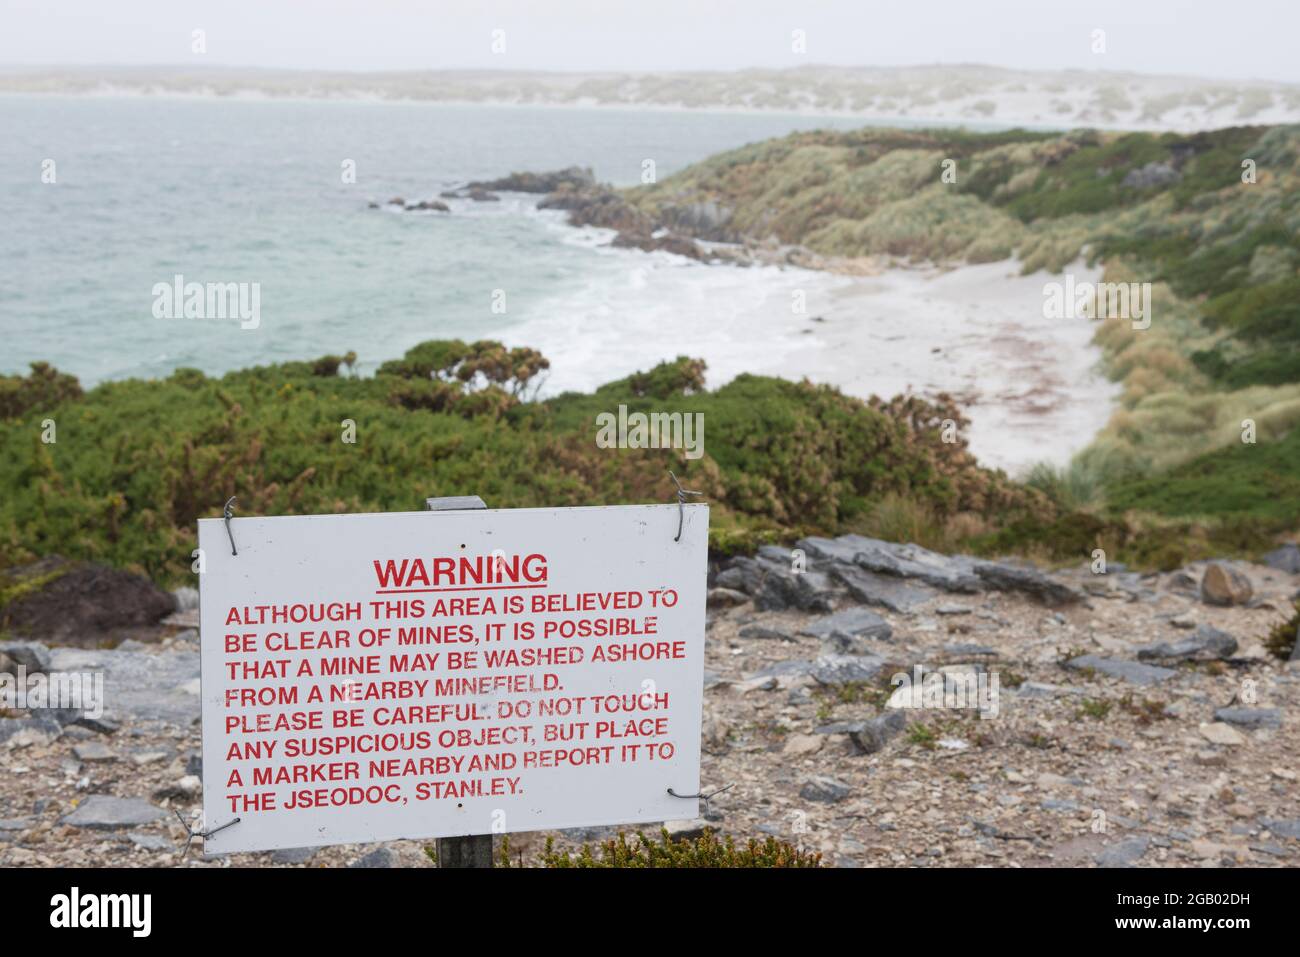 Sign near Port Stanley Falkland Islands warning of possible un exploded mines following the war in 1982 Stock Photo